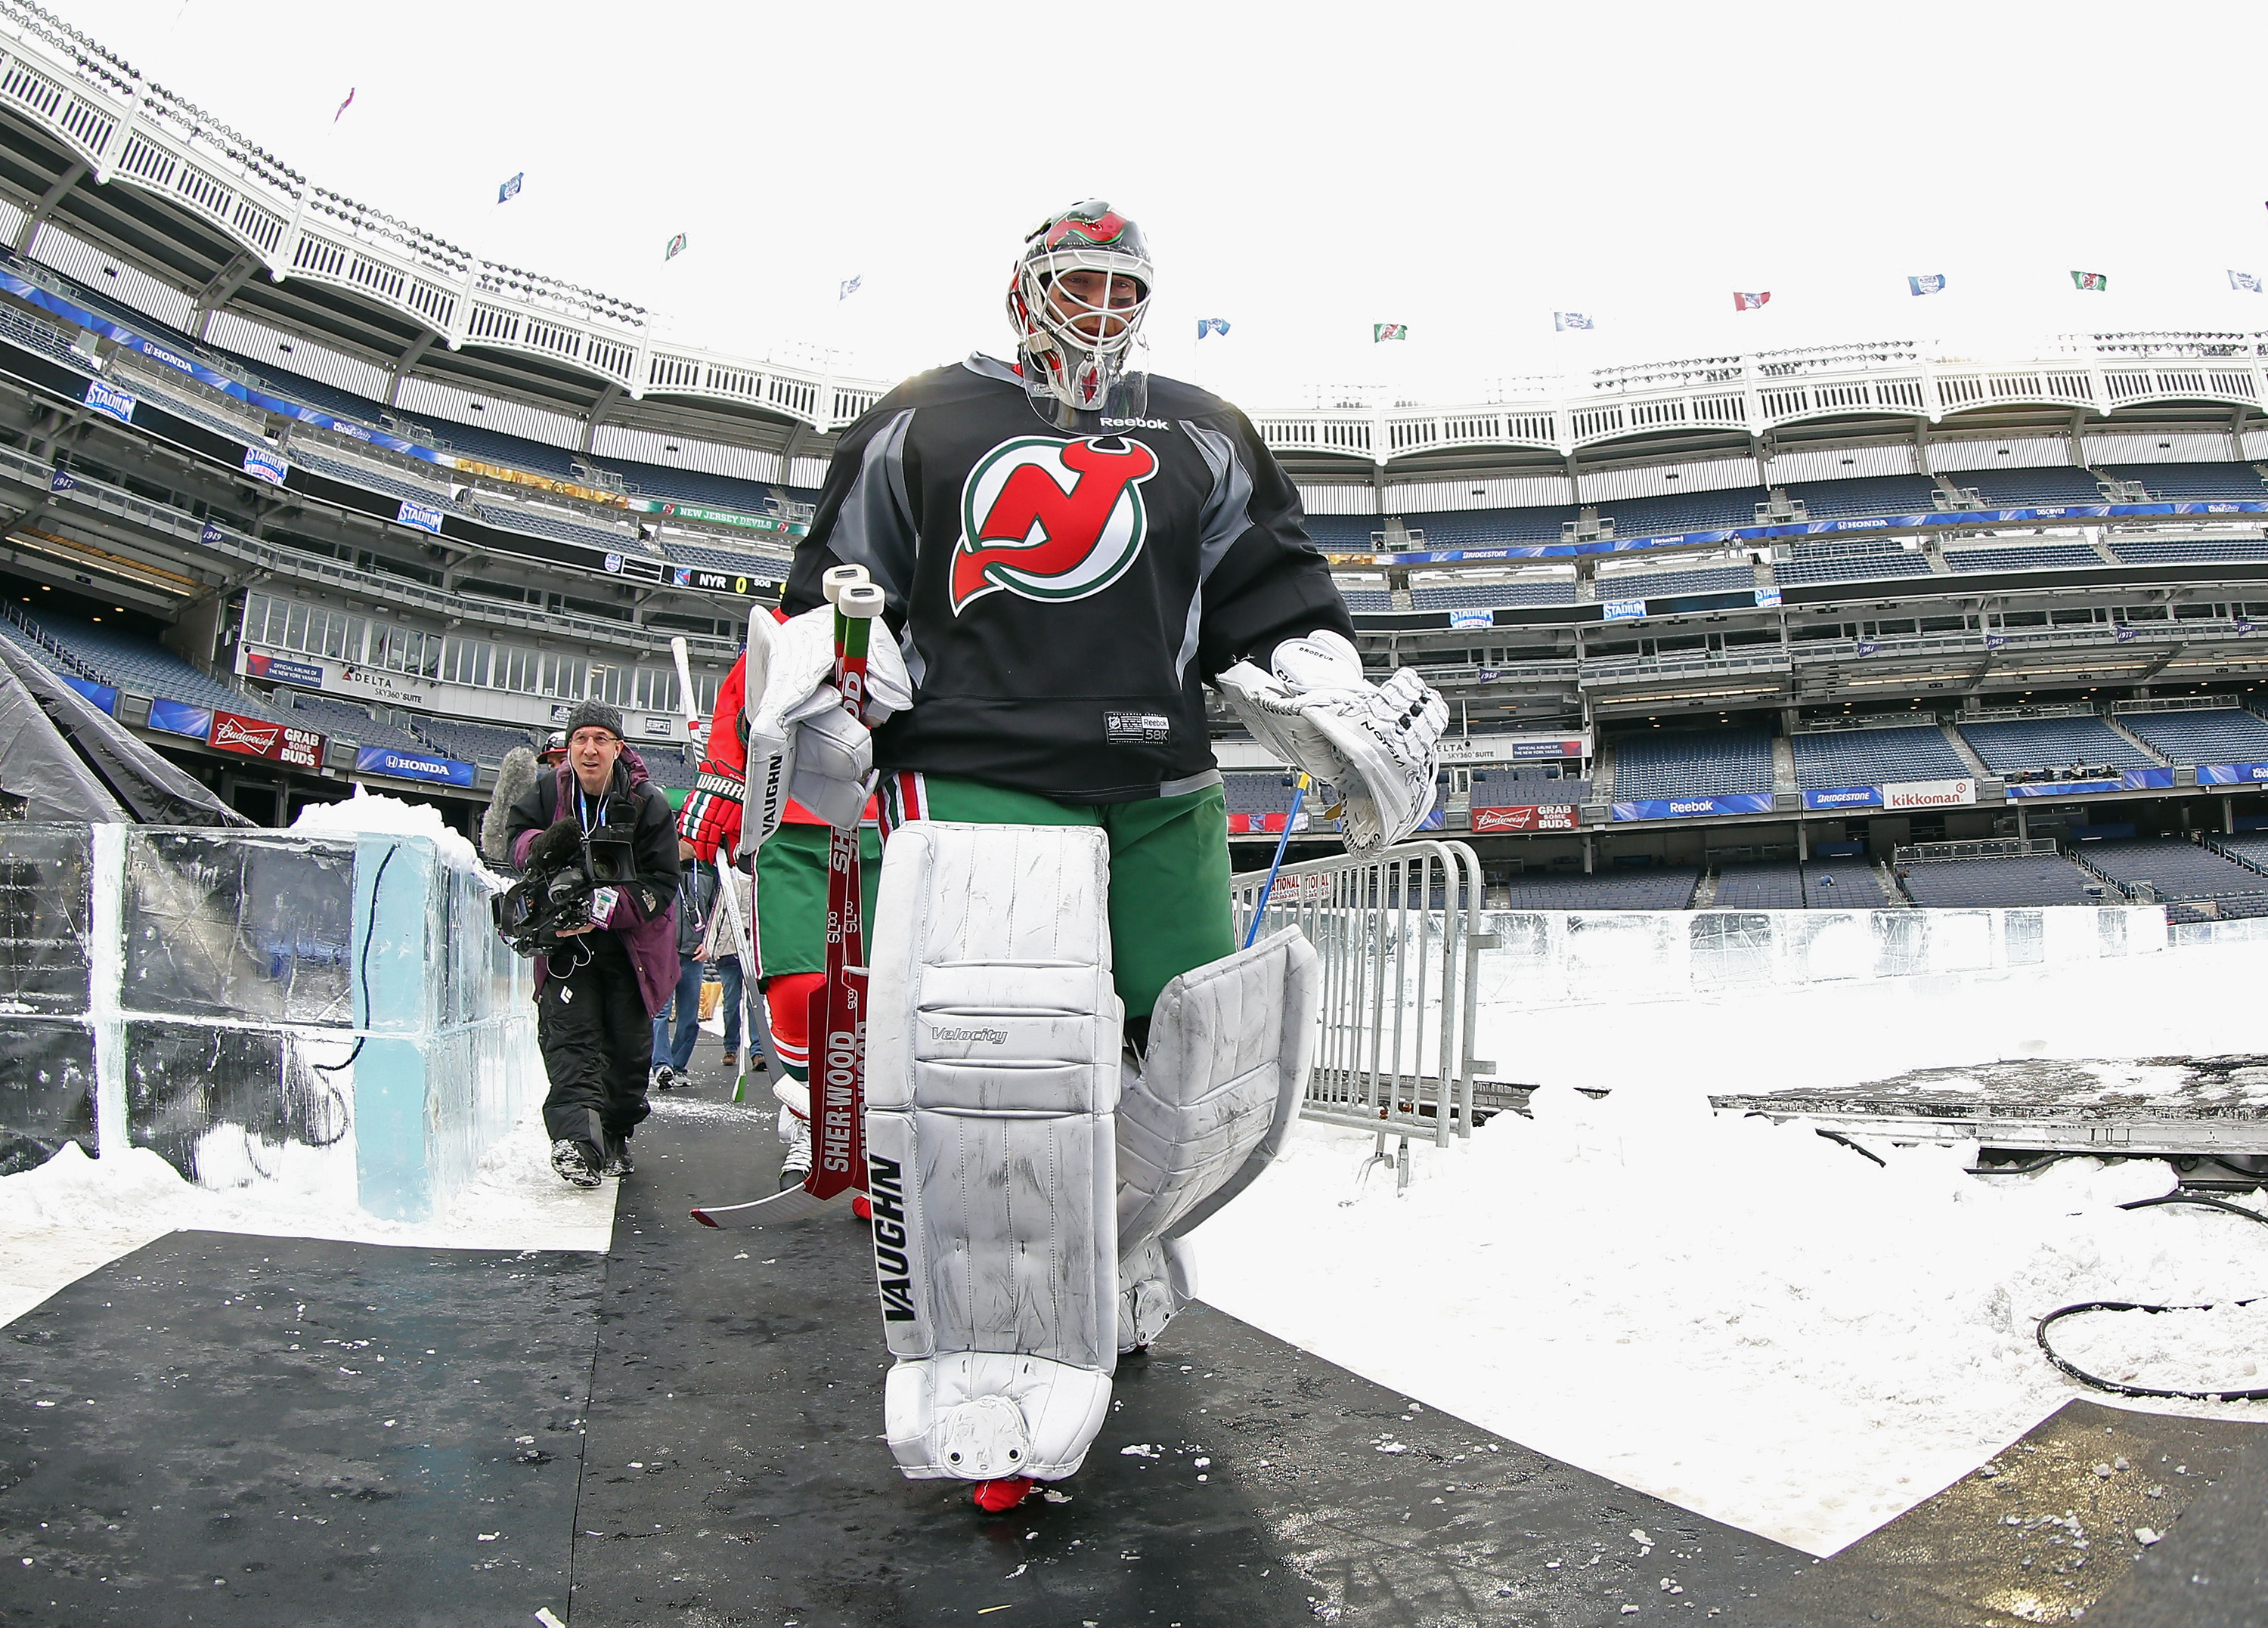 2014 NHL Stadium Series - New York - Practice Sessions And Family Skate